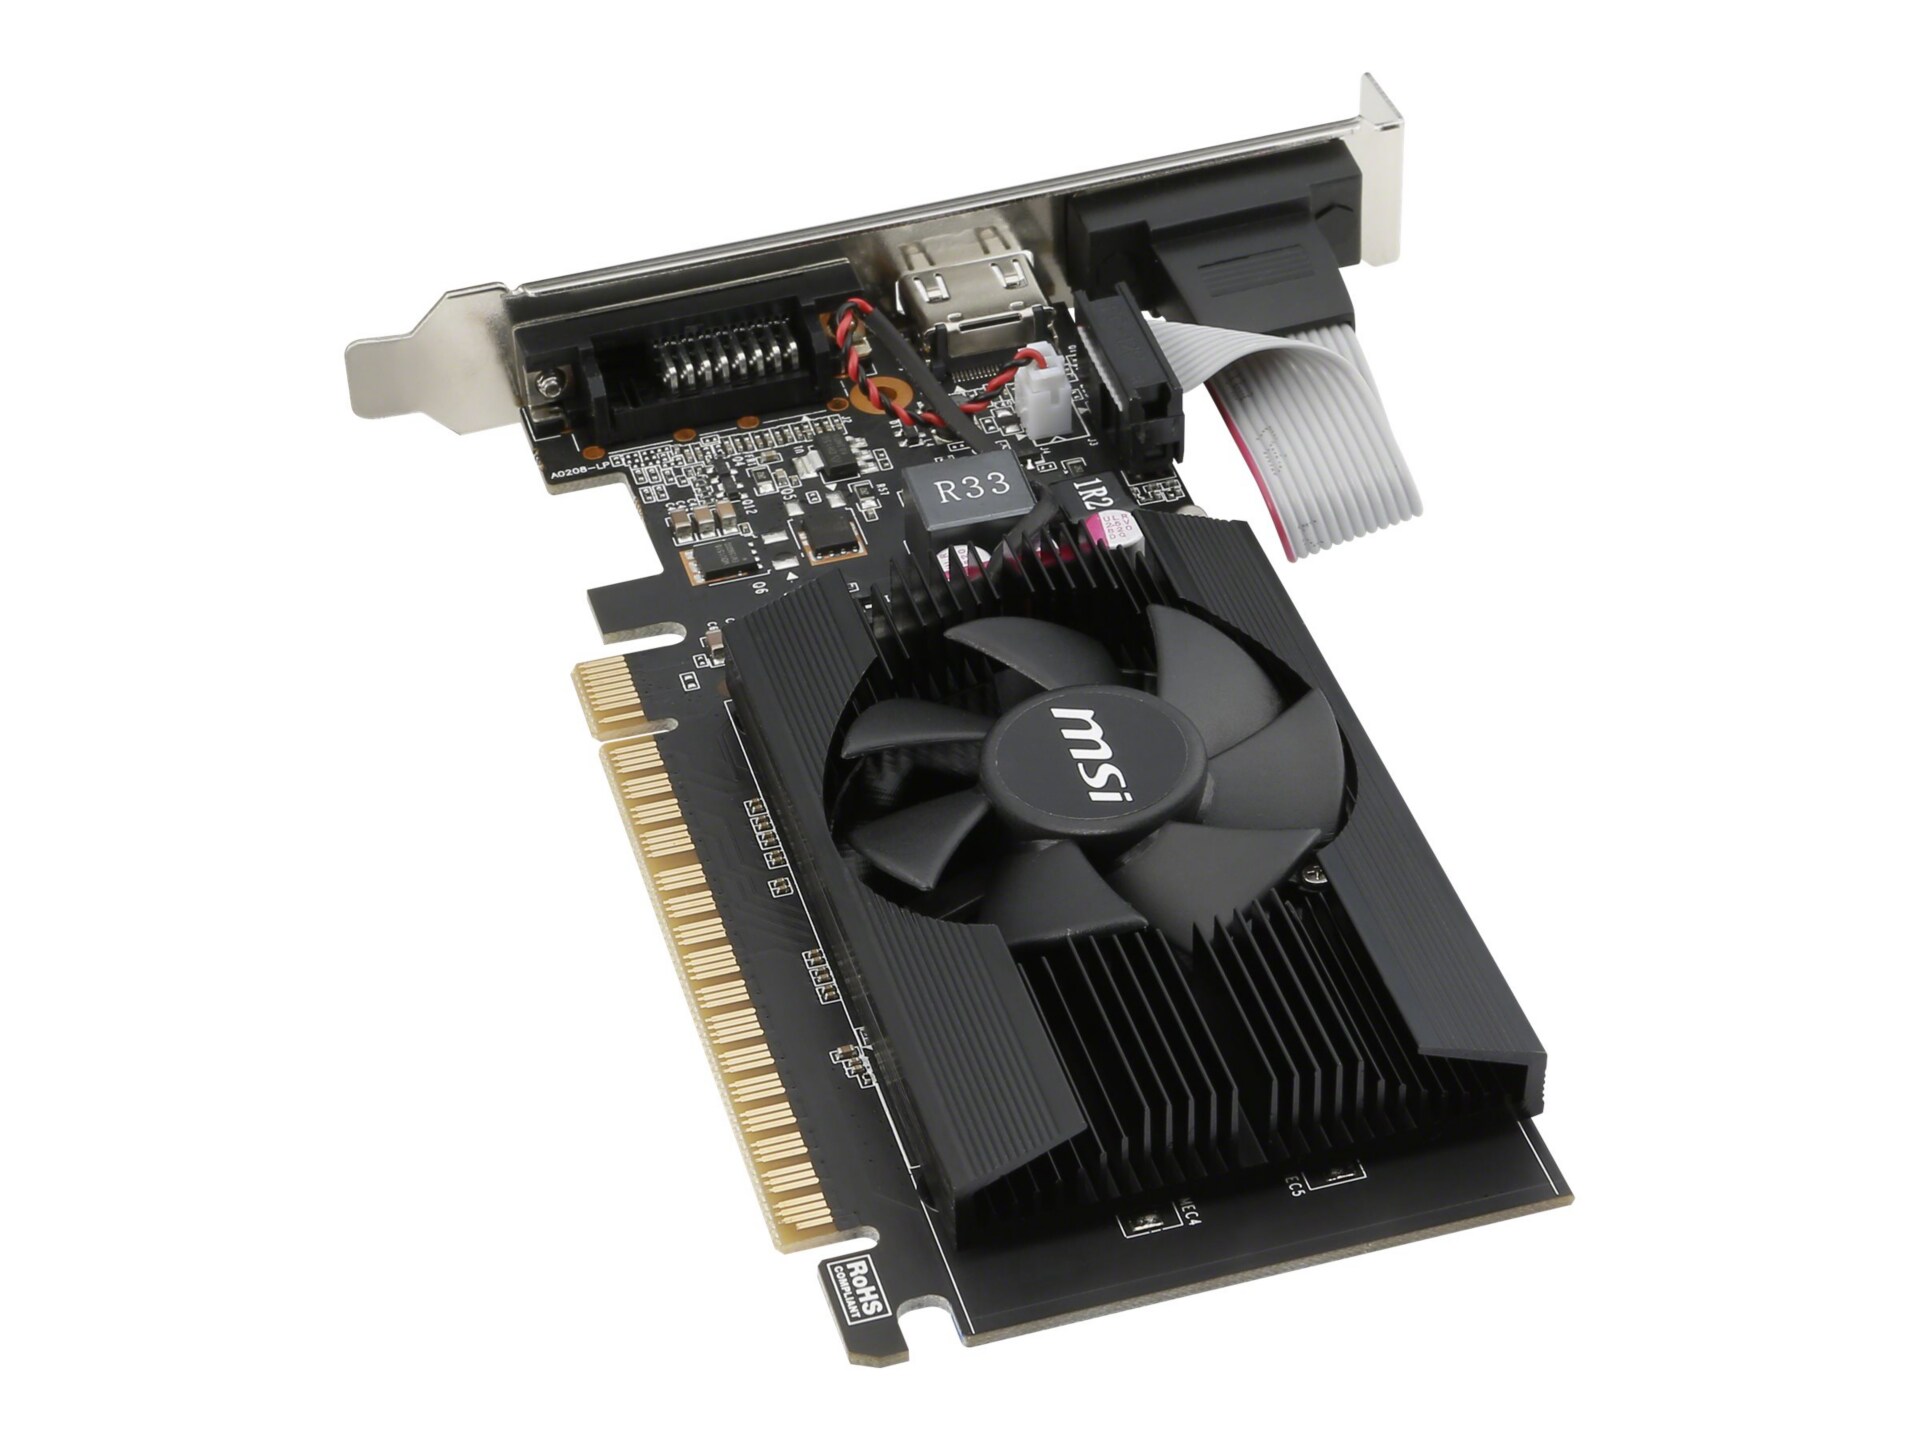 MSI NVIDIA GeForce GT 710 Graphic Card - 2 GB DDR3 SDRAM - Low-profile